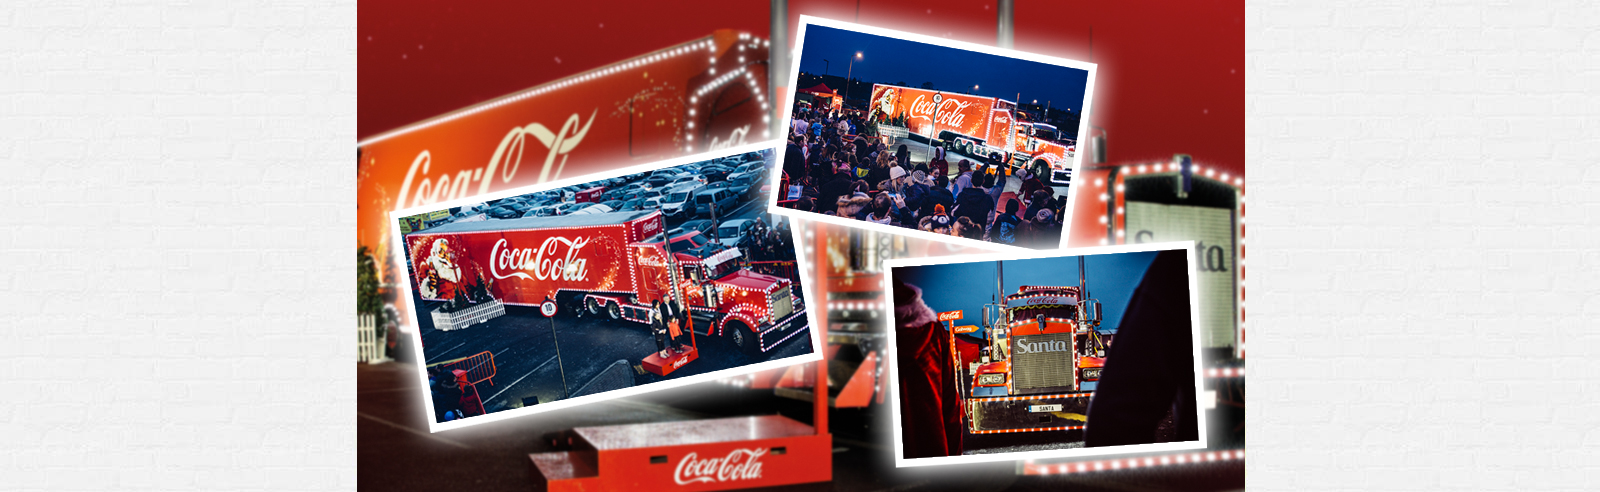 Video: Supermac’s presents The Coca-Cola Christmas Truck